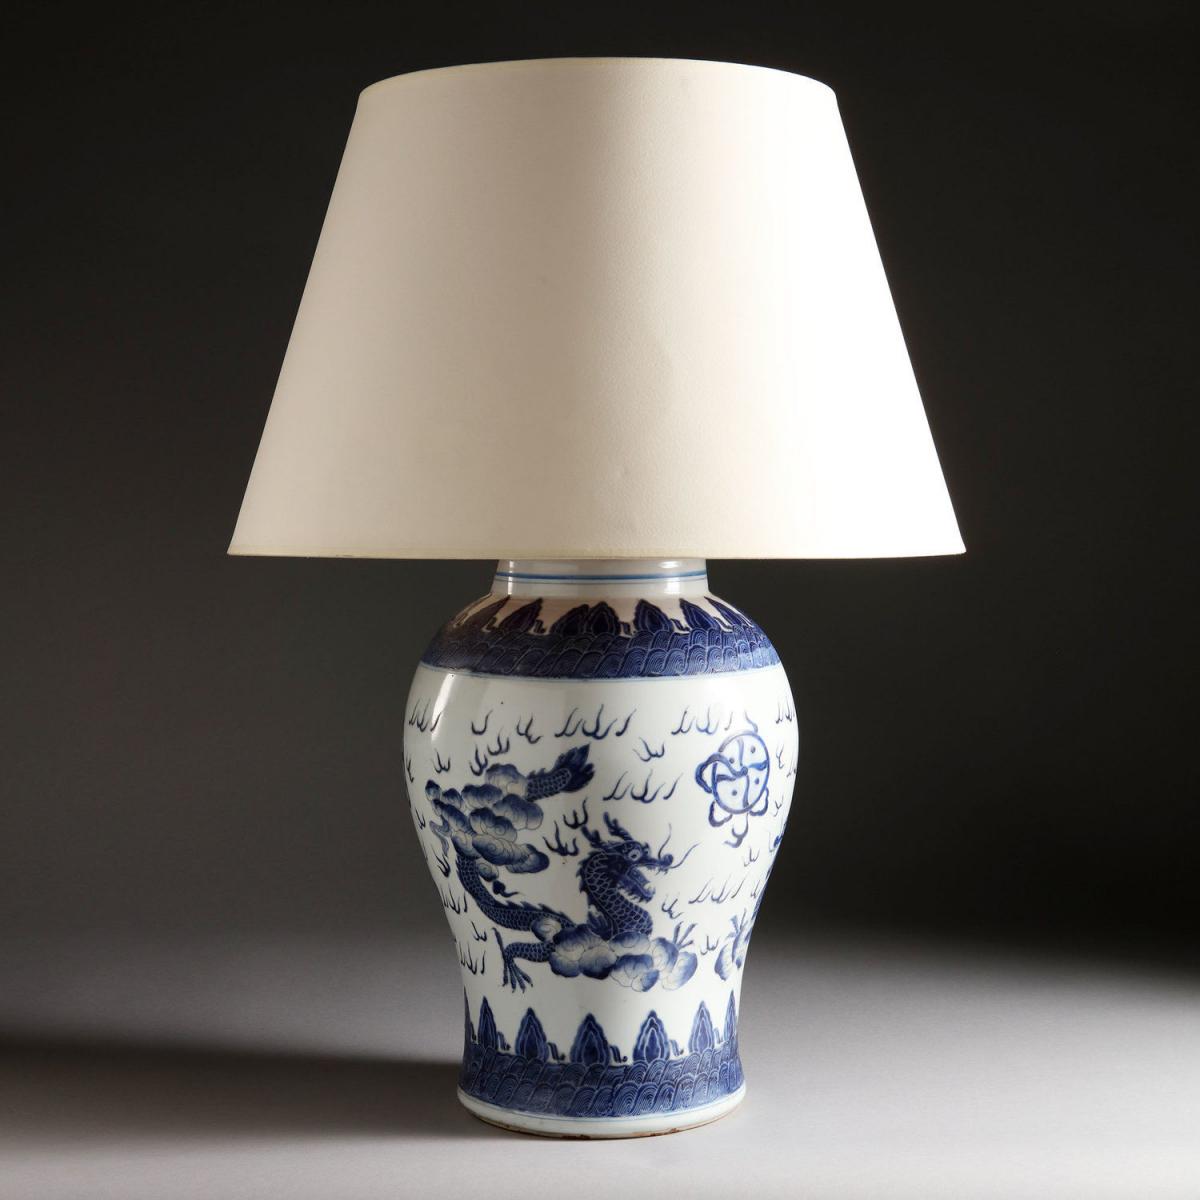 A Large Blue and White Chinese Vase as a Lamp | BADA